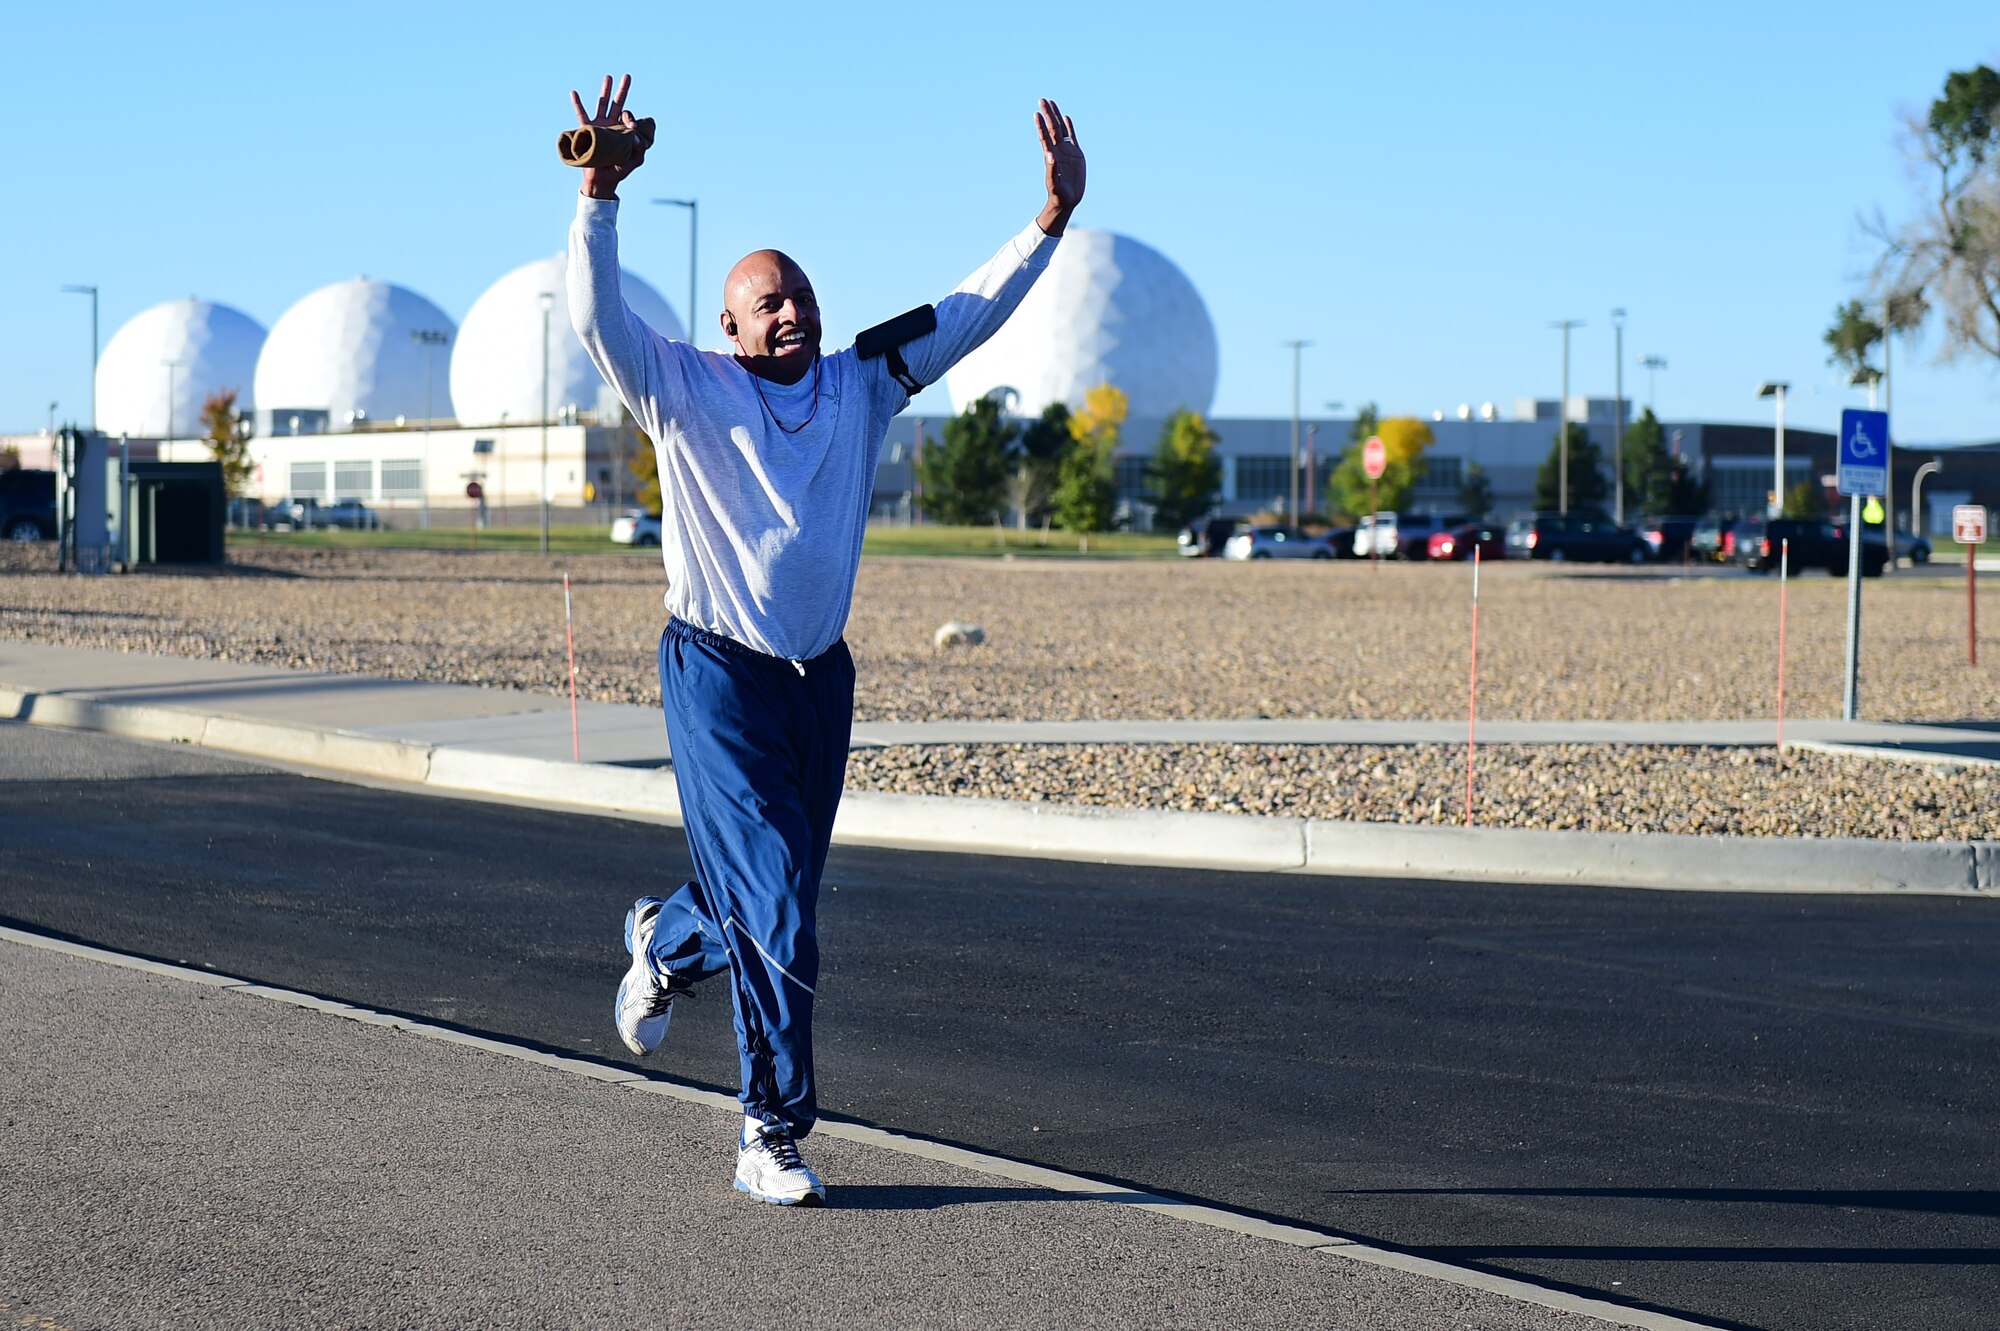 Chief Master Sgt. Rod Lindsey, 460th Space Wing command chief, celebrates as he nears the end of a Domestic Violence Awareness Month 5K Run/Walk Oct. 5, 2016, at the outdoor track on Buckley Air Force Base, Colo. Participants either ran or walked to bring awareness to the one in five women and one in seven men in the United States who, according to National Coalition Against Domestic Violence statistics, have suffered severe physical violence by an intimate partner within their lifetime. (U.S. Air Force photo by Airman 1st Class Gabrielle Spradling/Released)